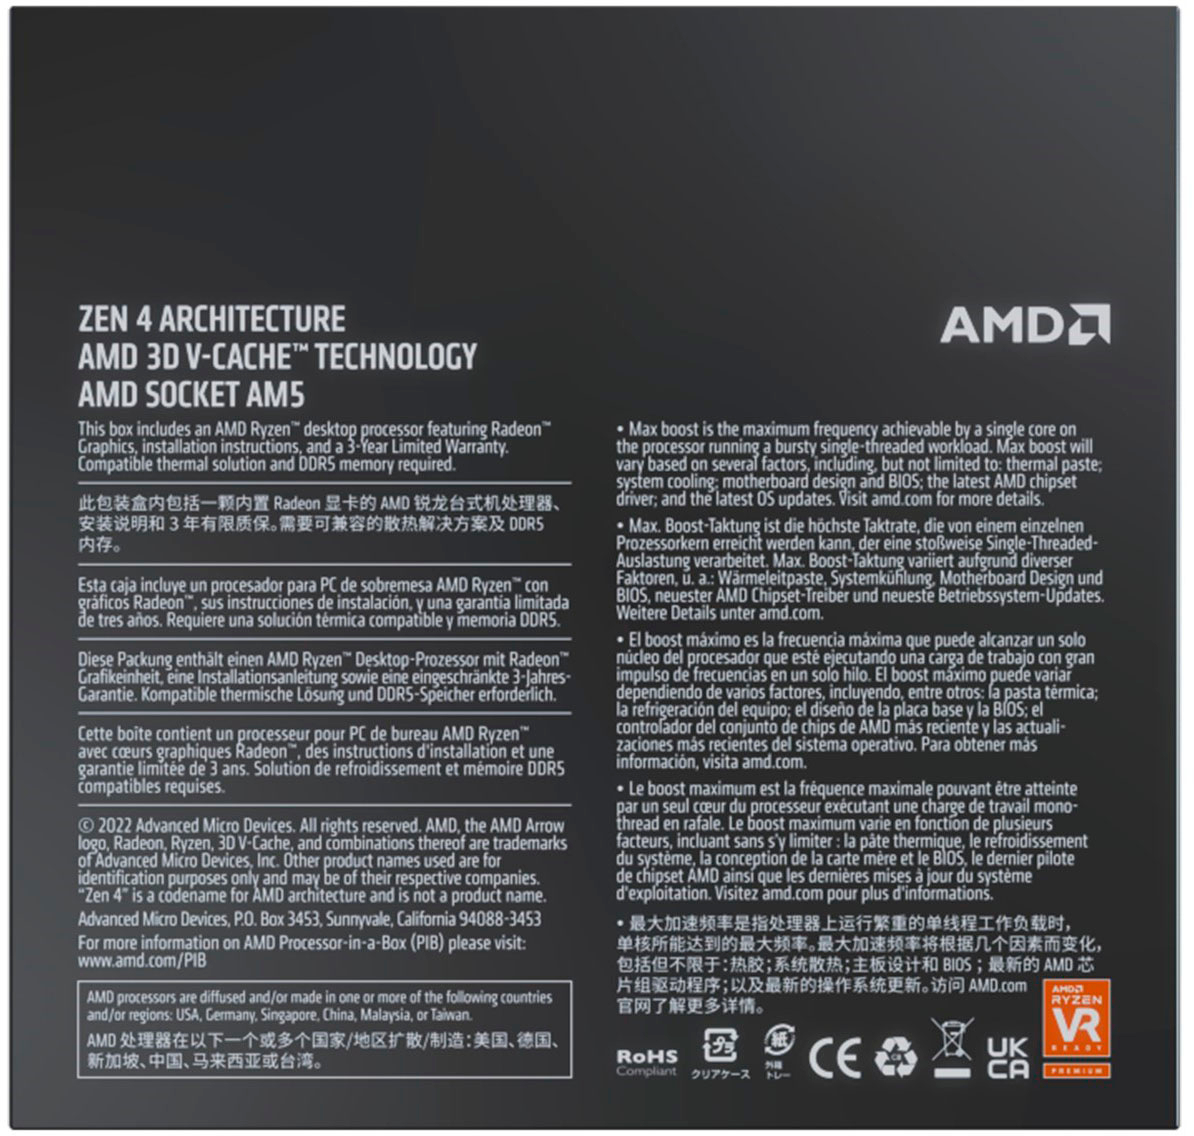 AMD's powerhouse Ryzen 7 7800X3D processor is now available for just $349